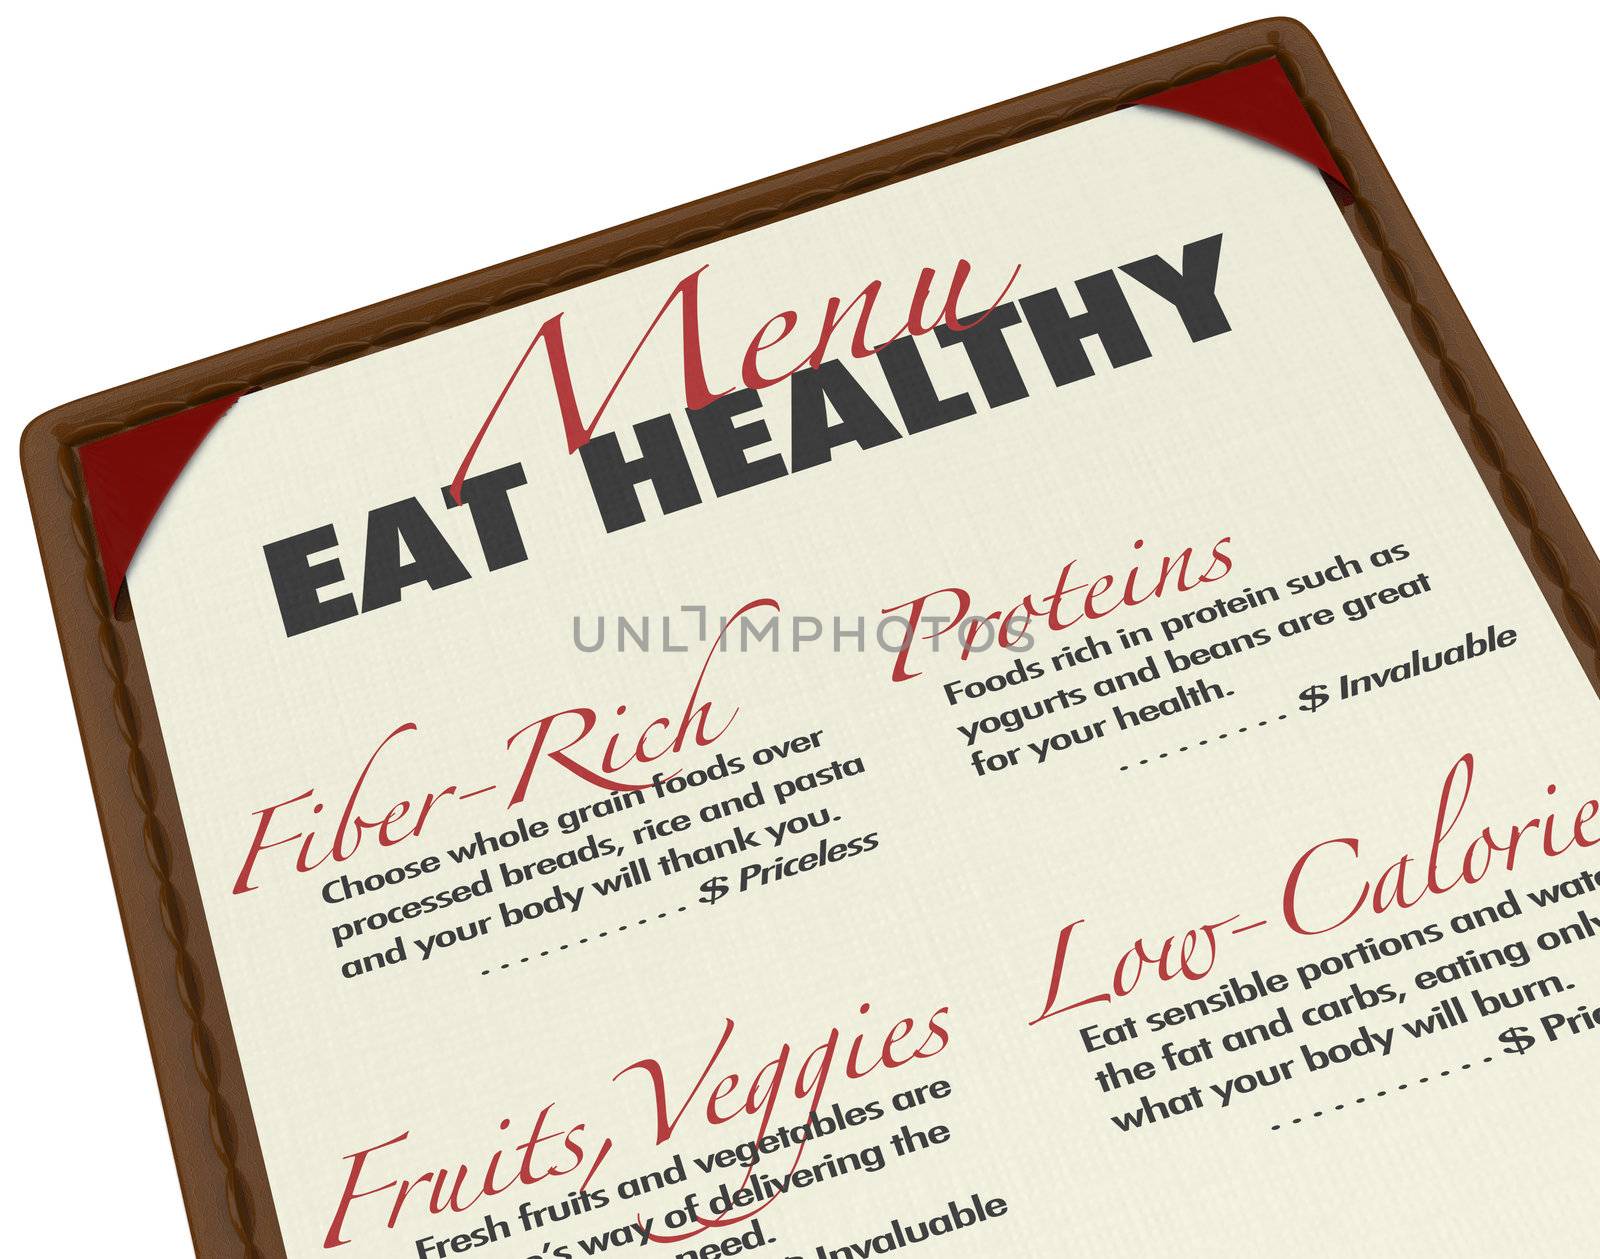 Eat Healthy Menu Smart Food Choices Protein Fiber Low-Fat by iQoncept